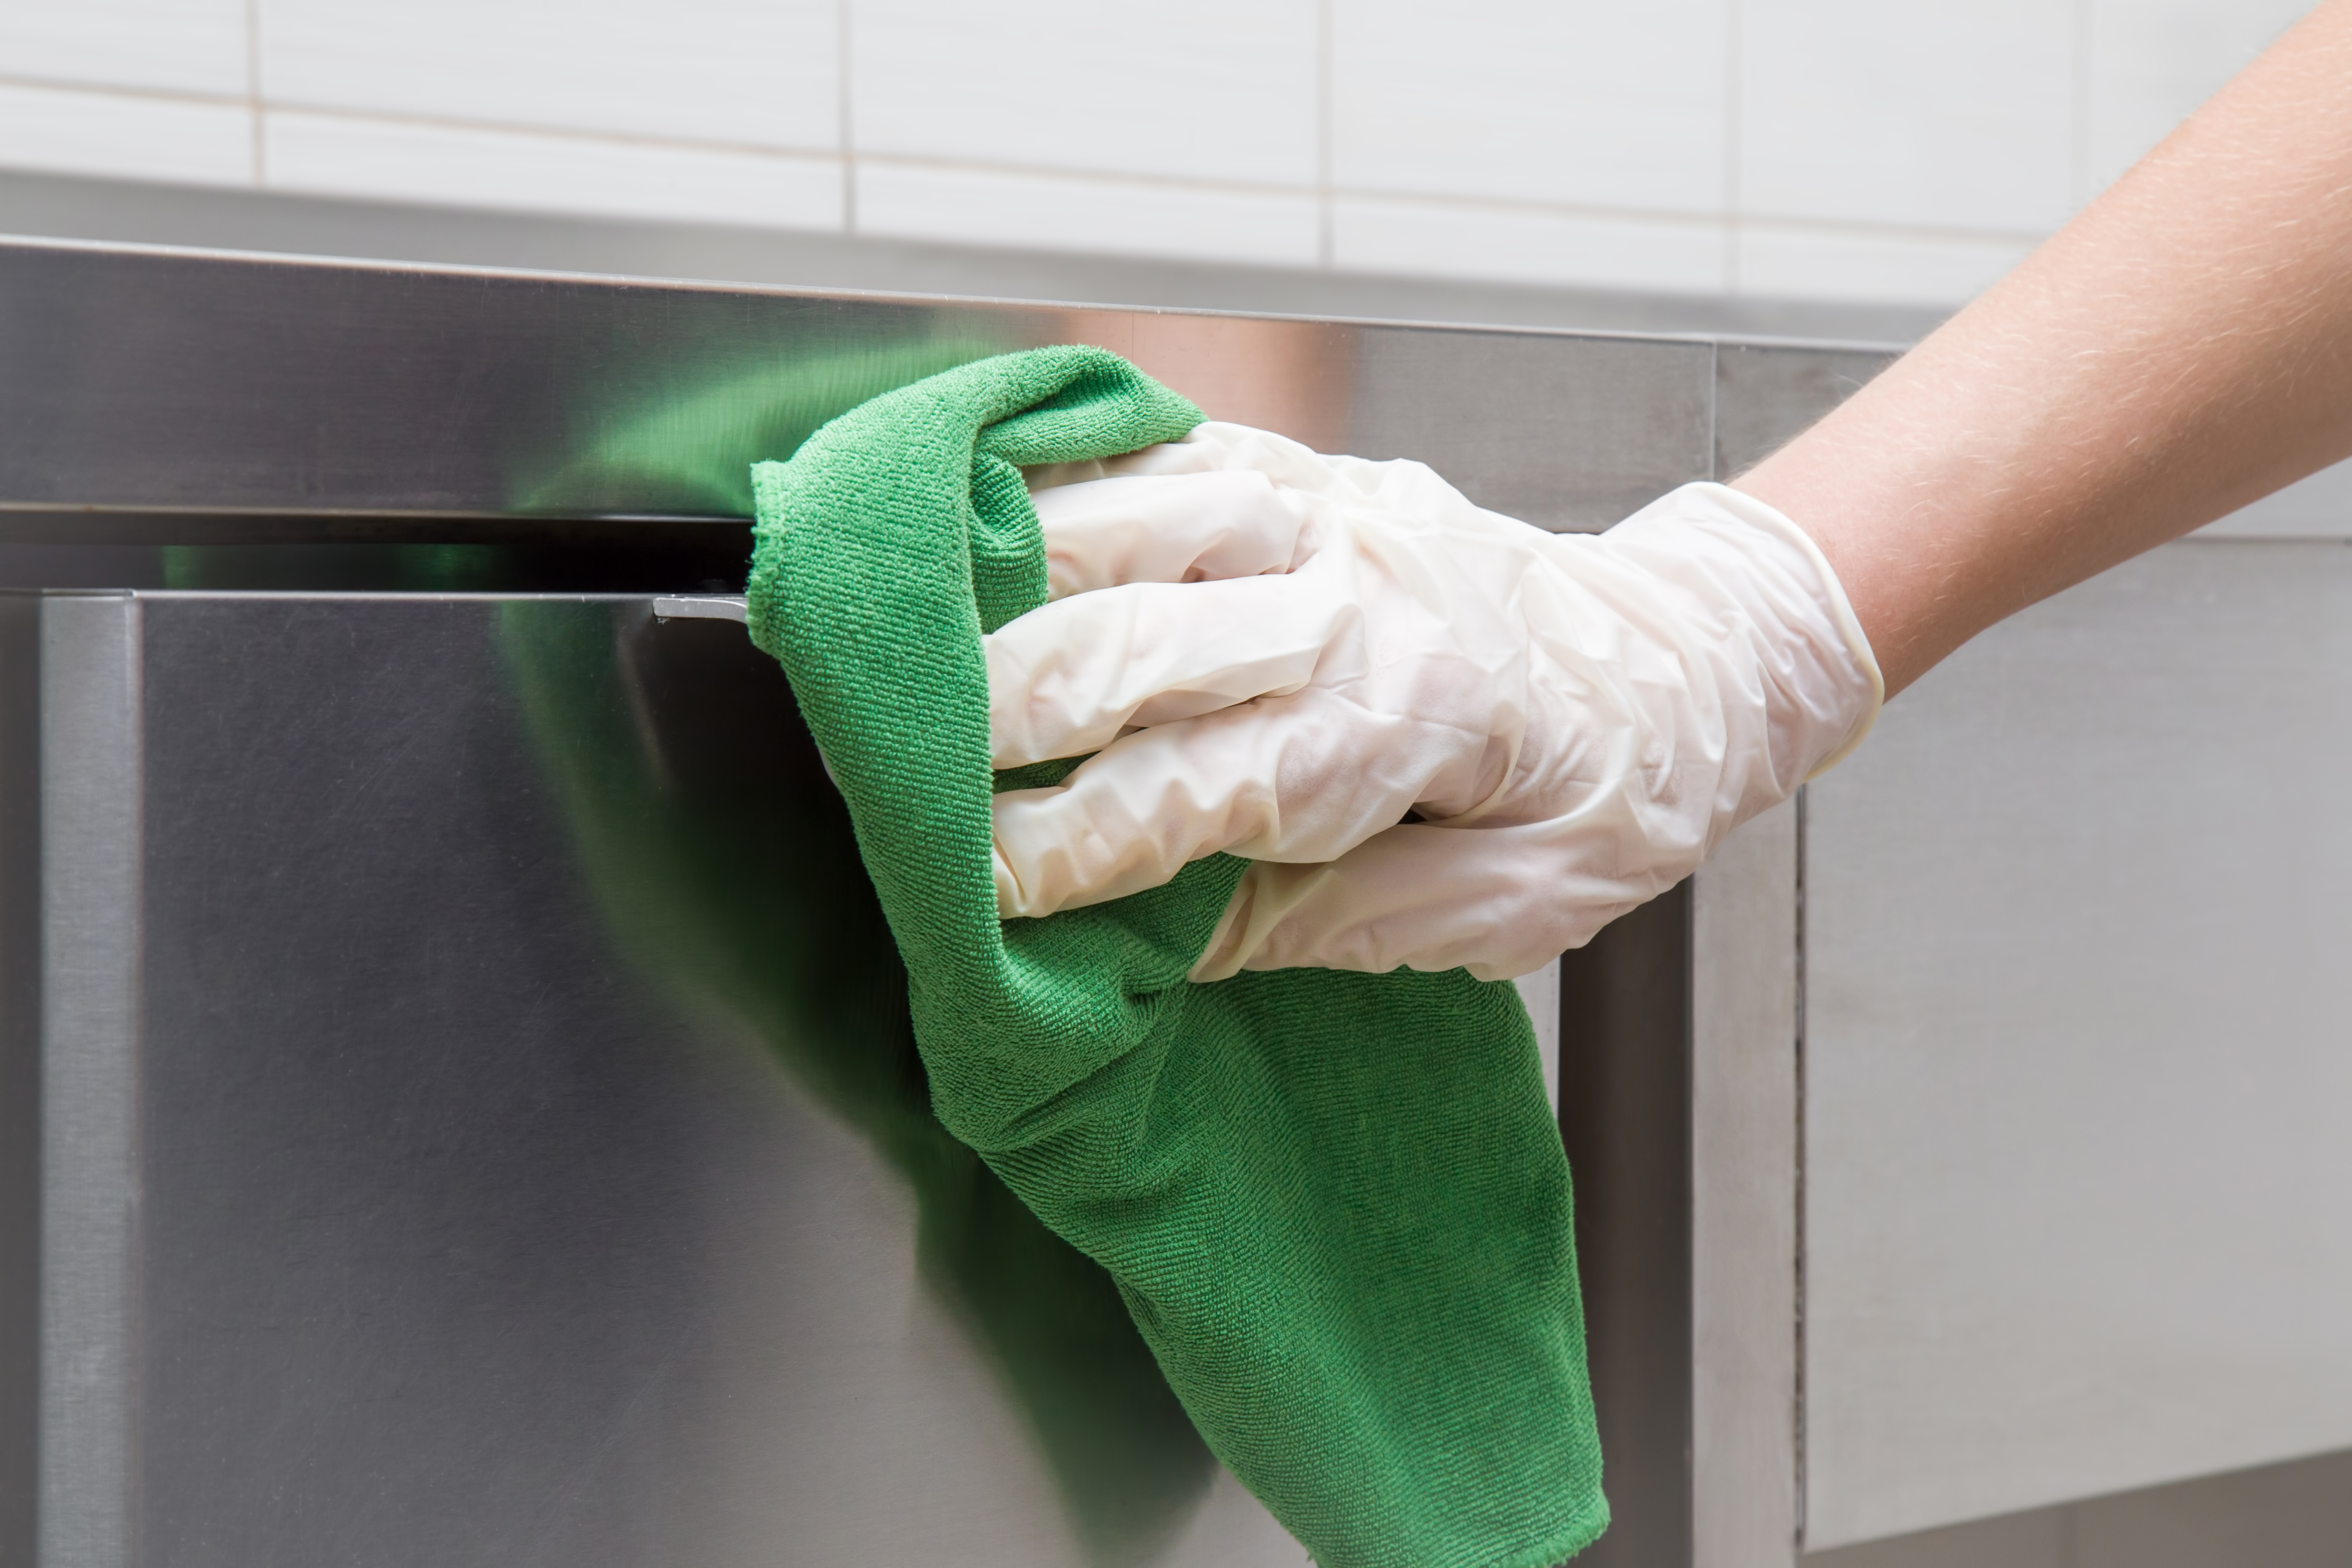 A Housekeeper Advises Using This to Clean Your Stainless-Steel